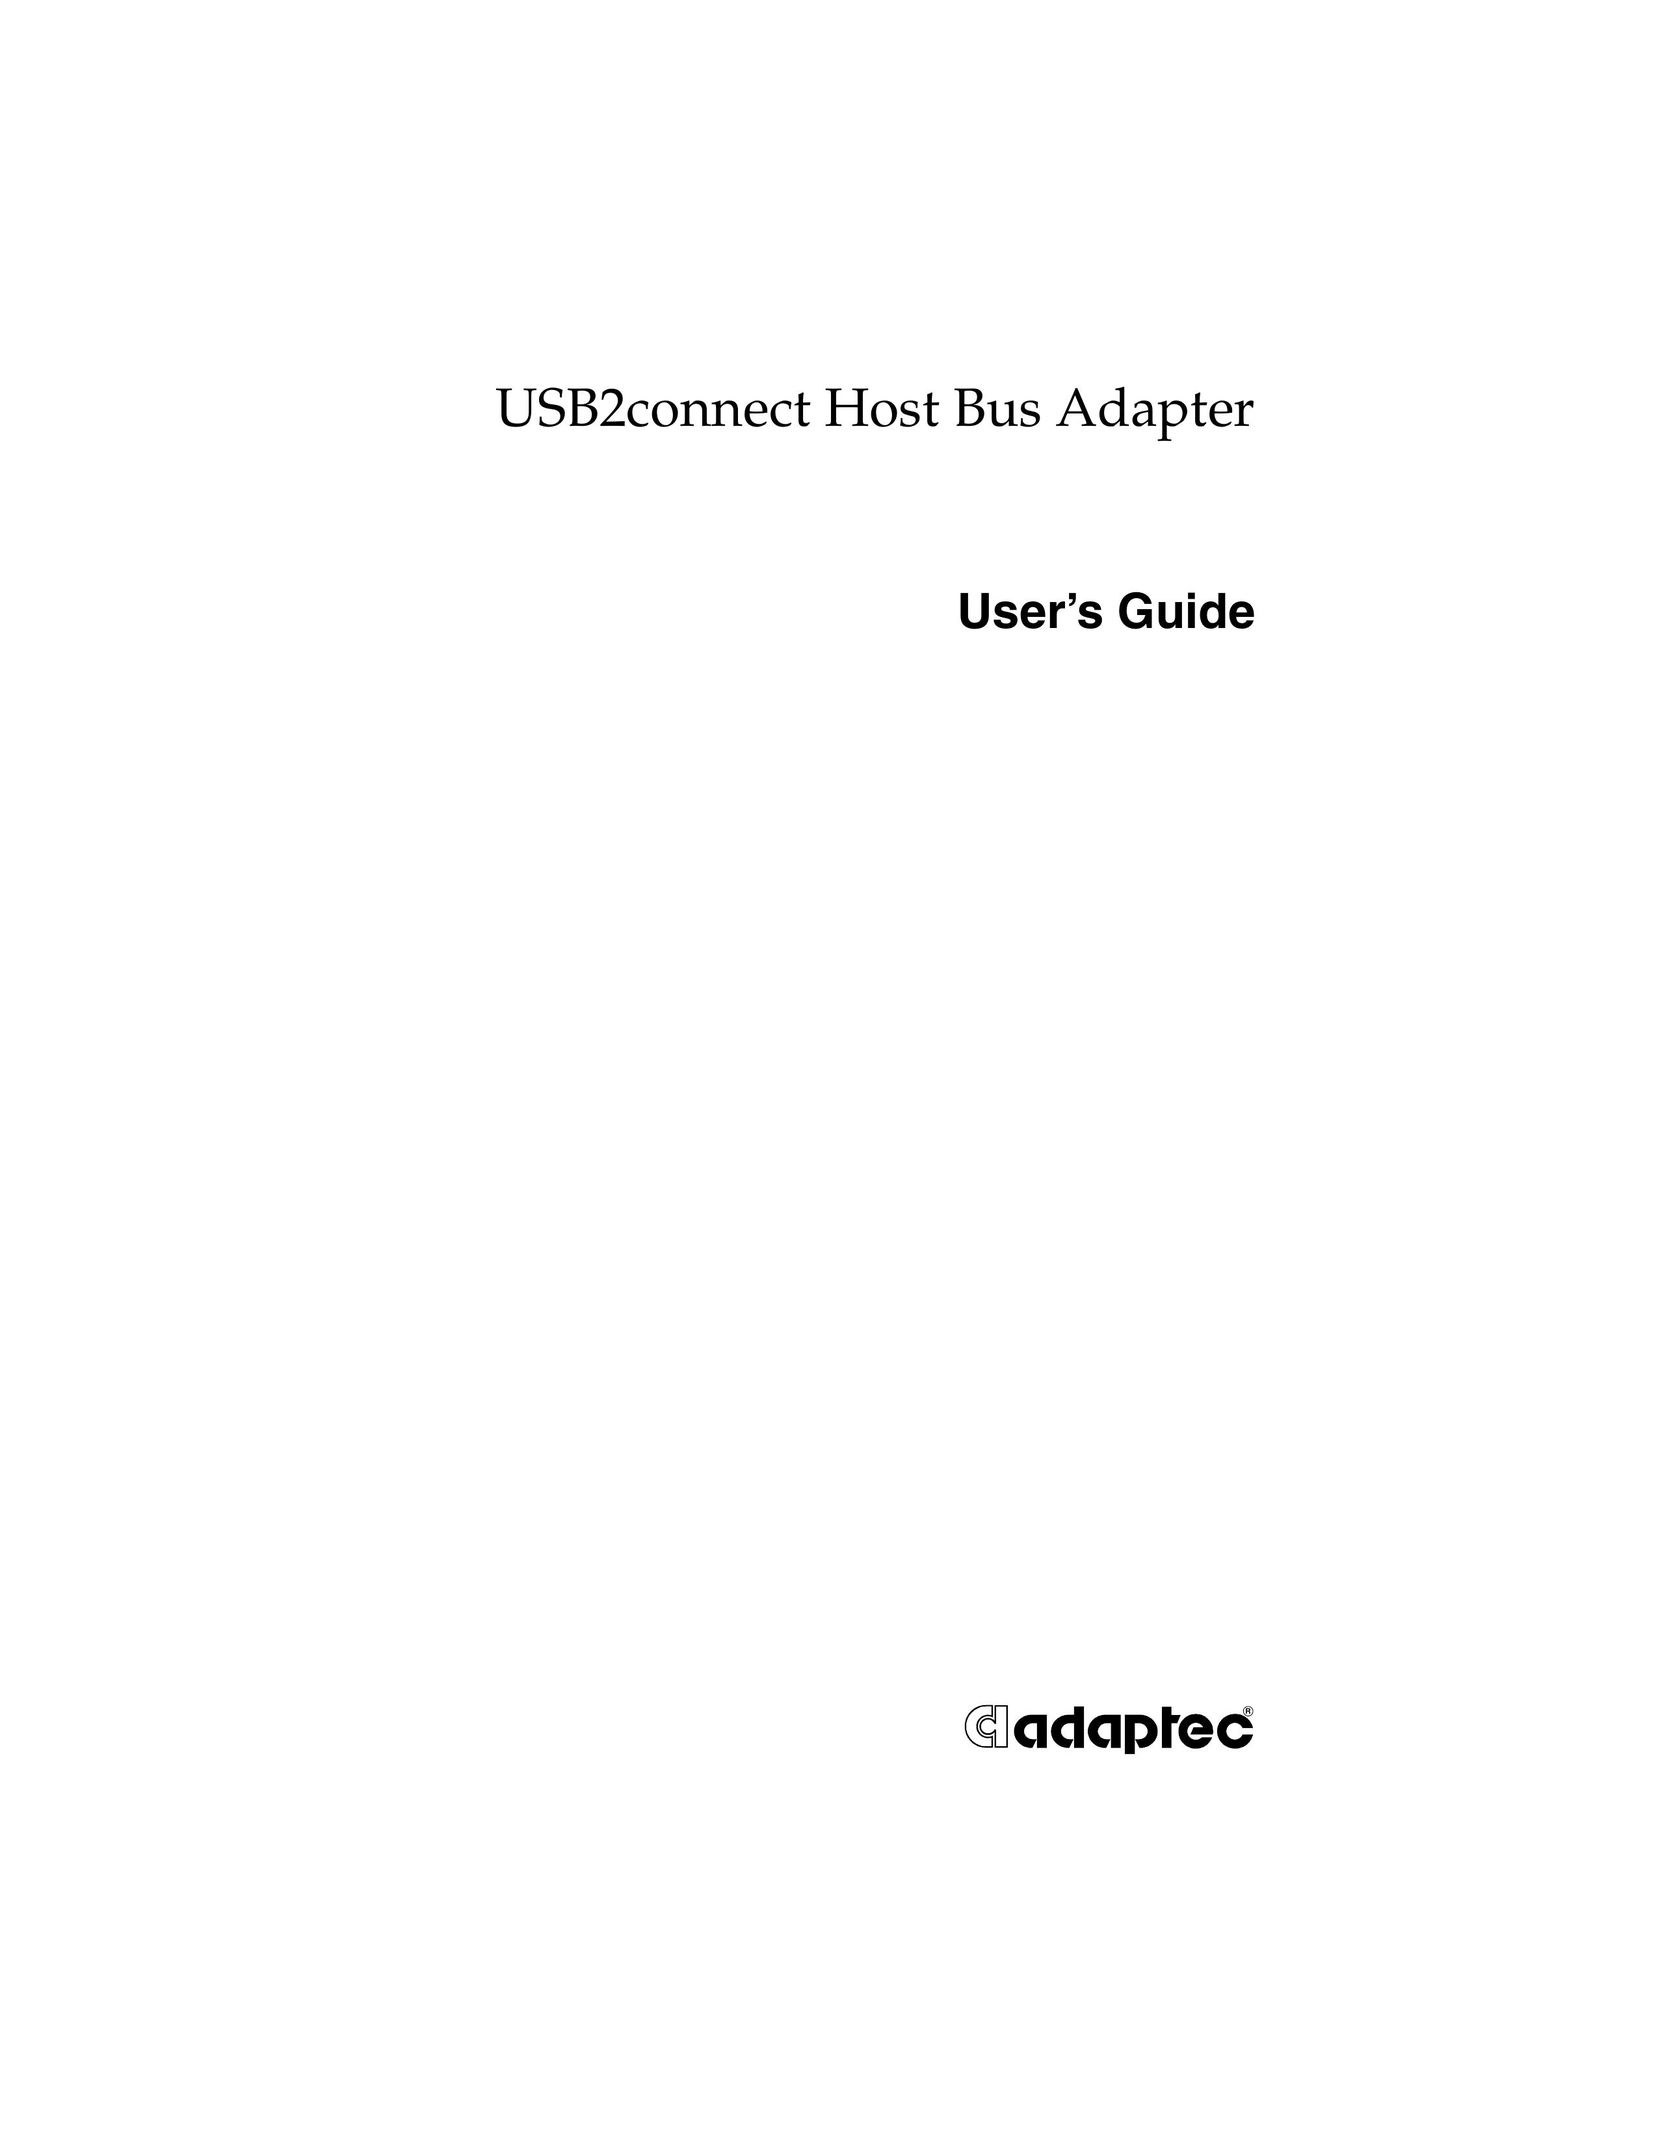 Adaptec USB2connect Host Bus Adapter Network Card User Manual